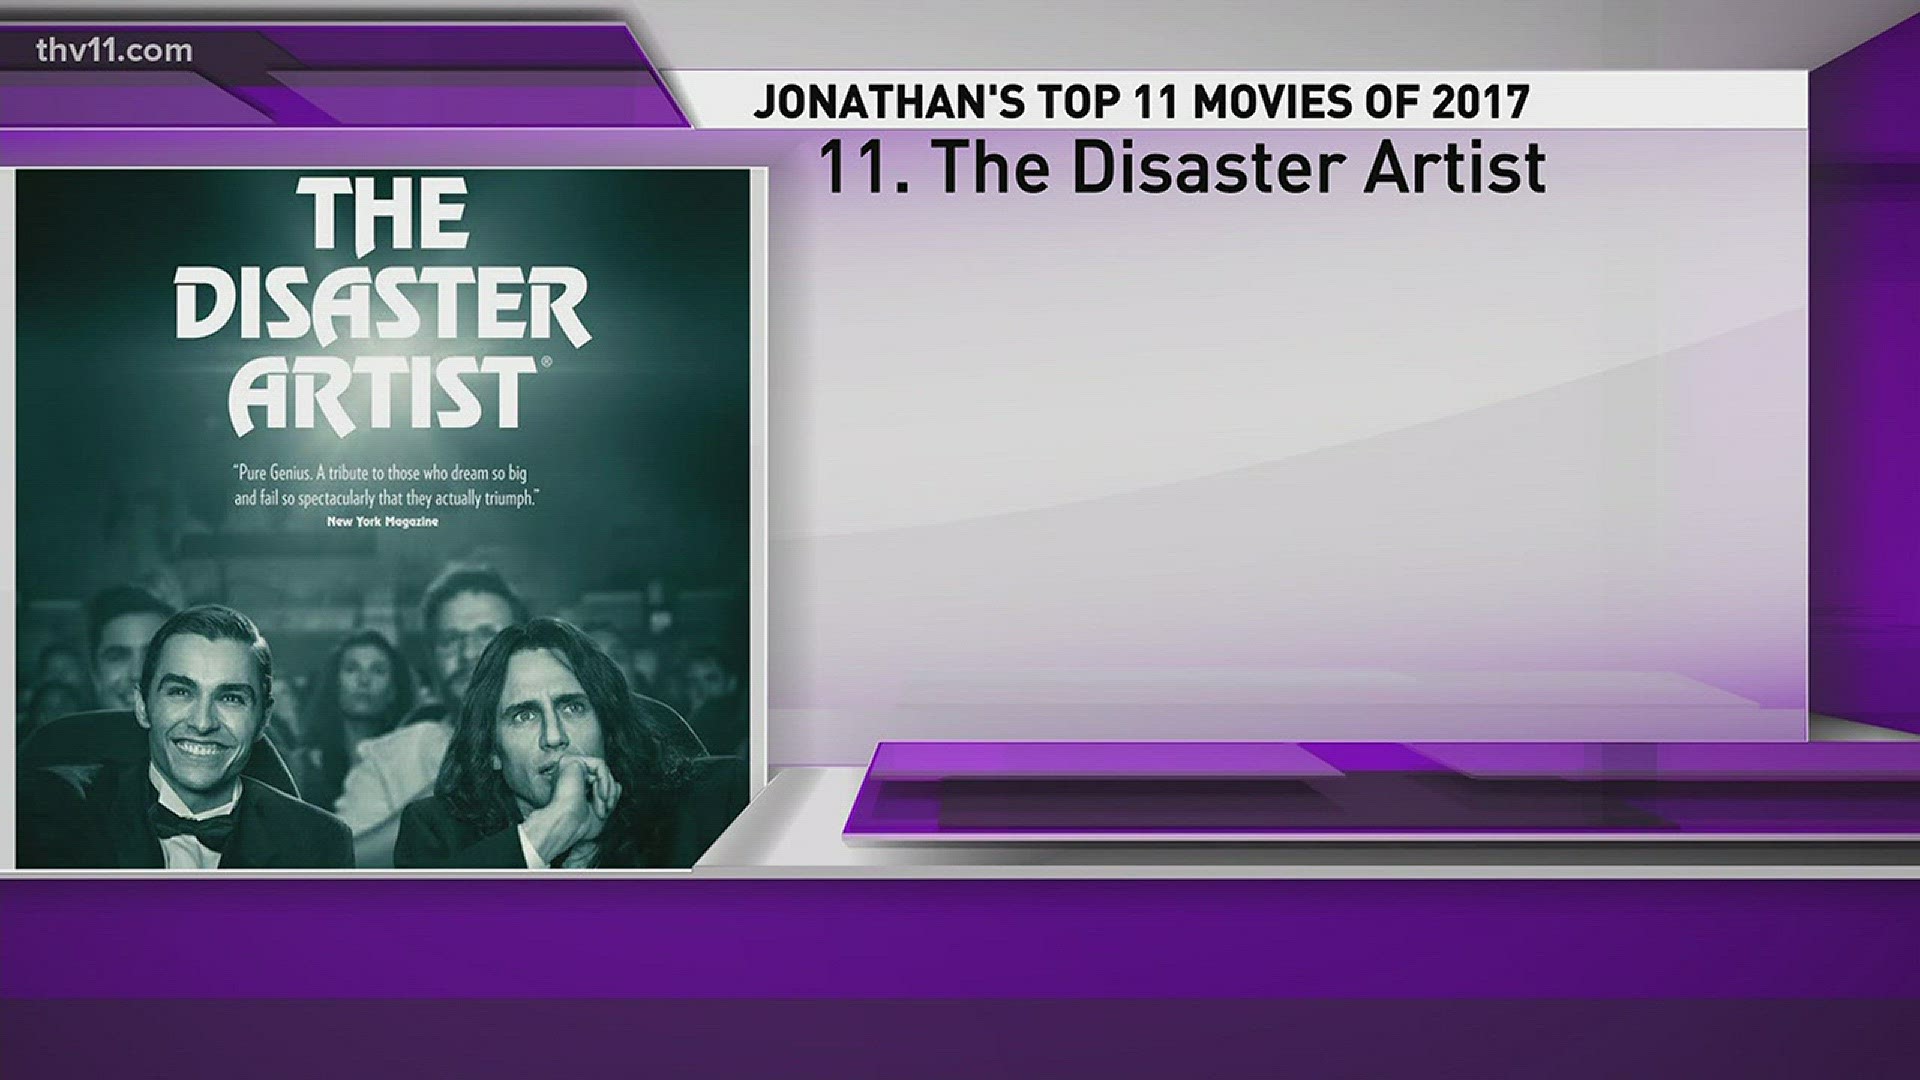 THV11's movie critic Jonathan Nettles gives us his list of the top 11 movies that graced the big screen this year